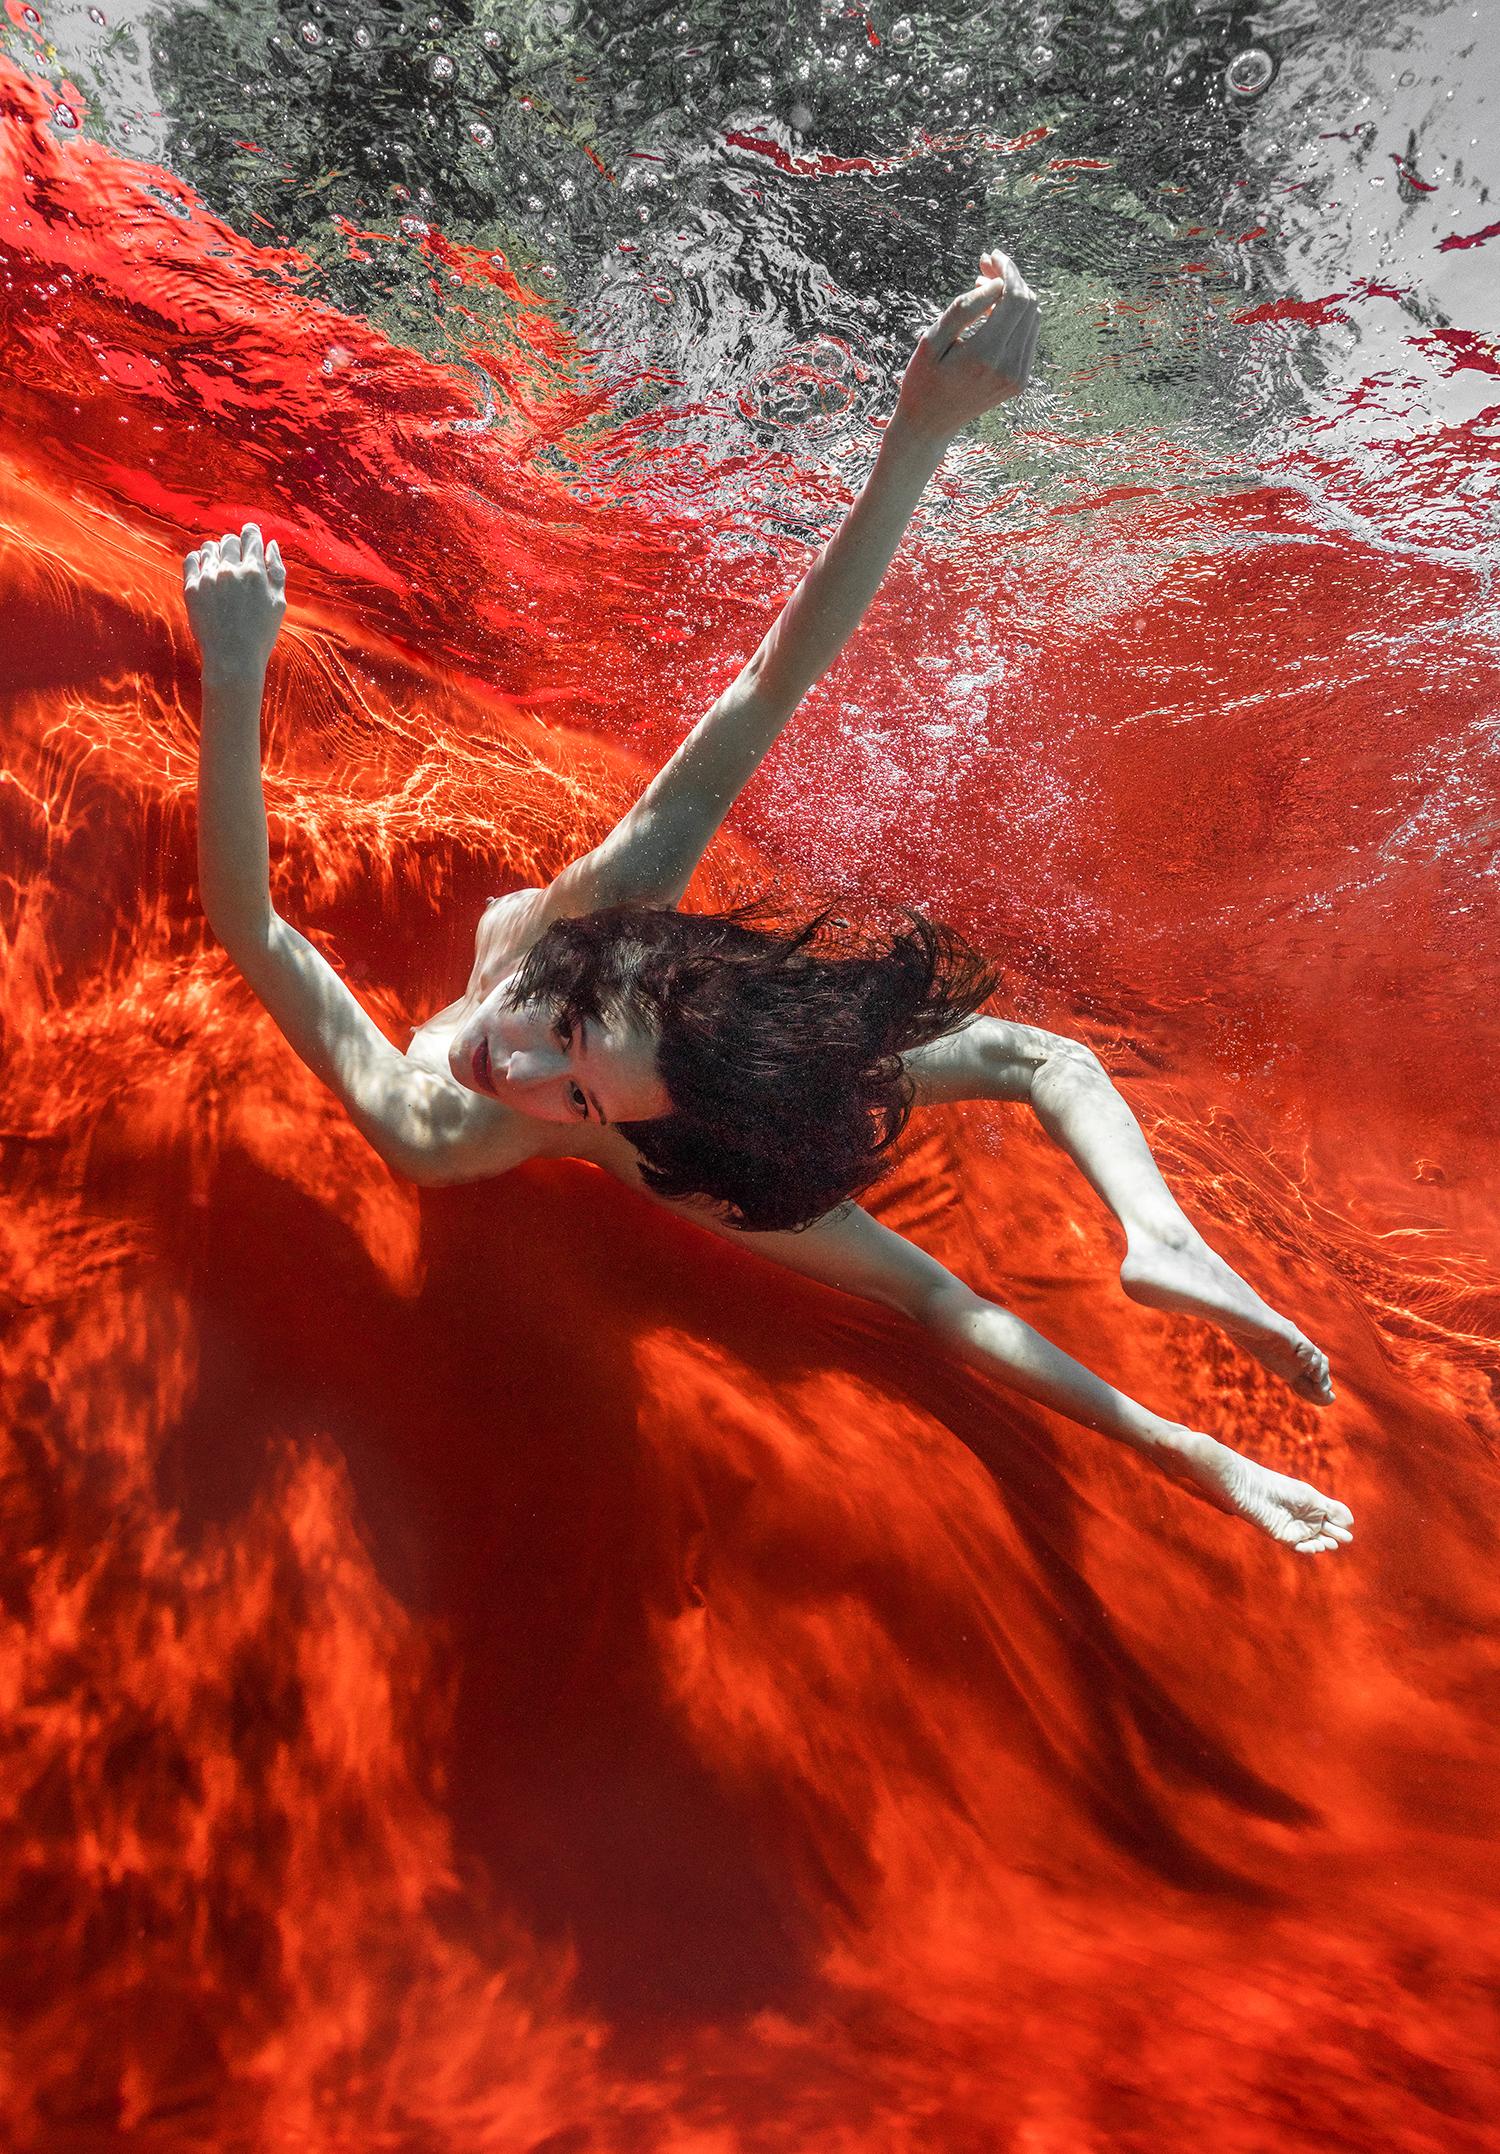 Alex Sher Nude Photograph - Wild Blood  - underwater nude photograph - archival pigment print 62x43"